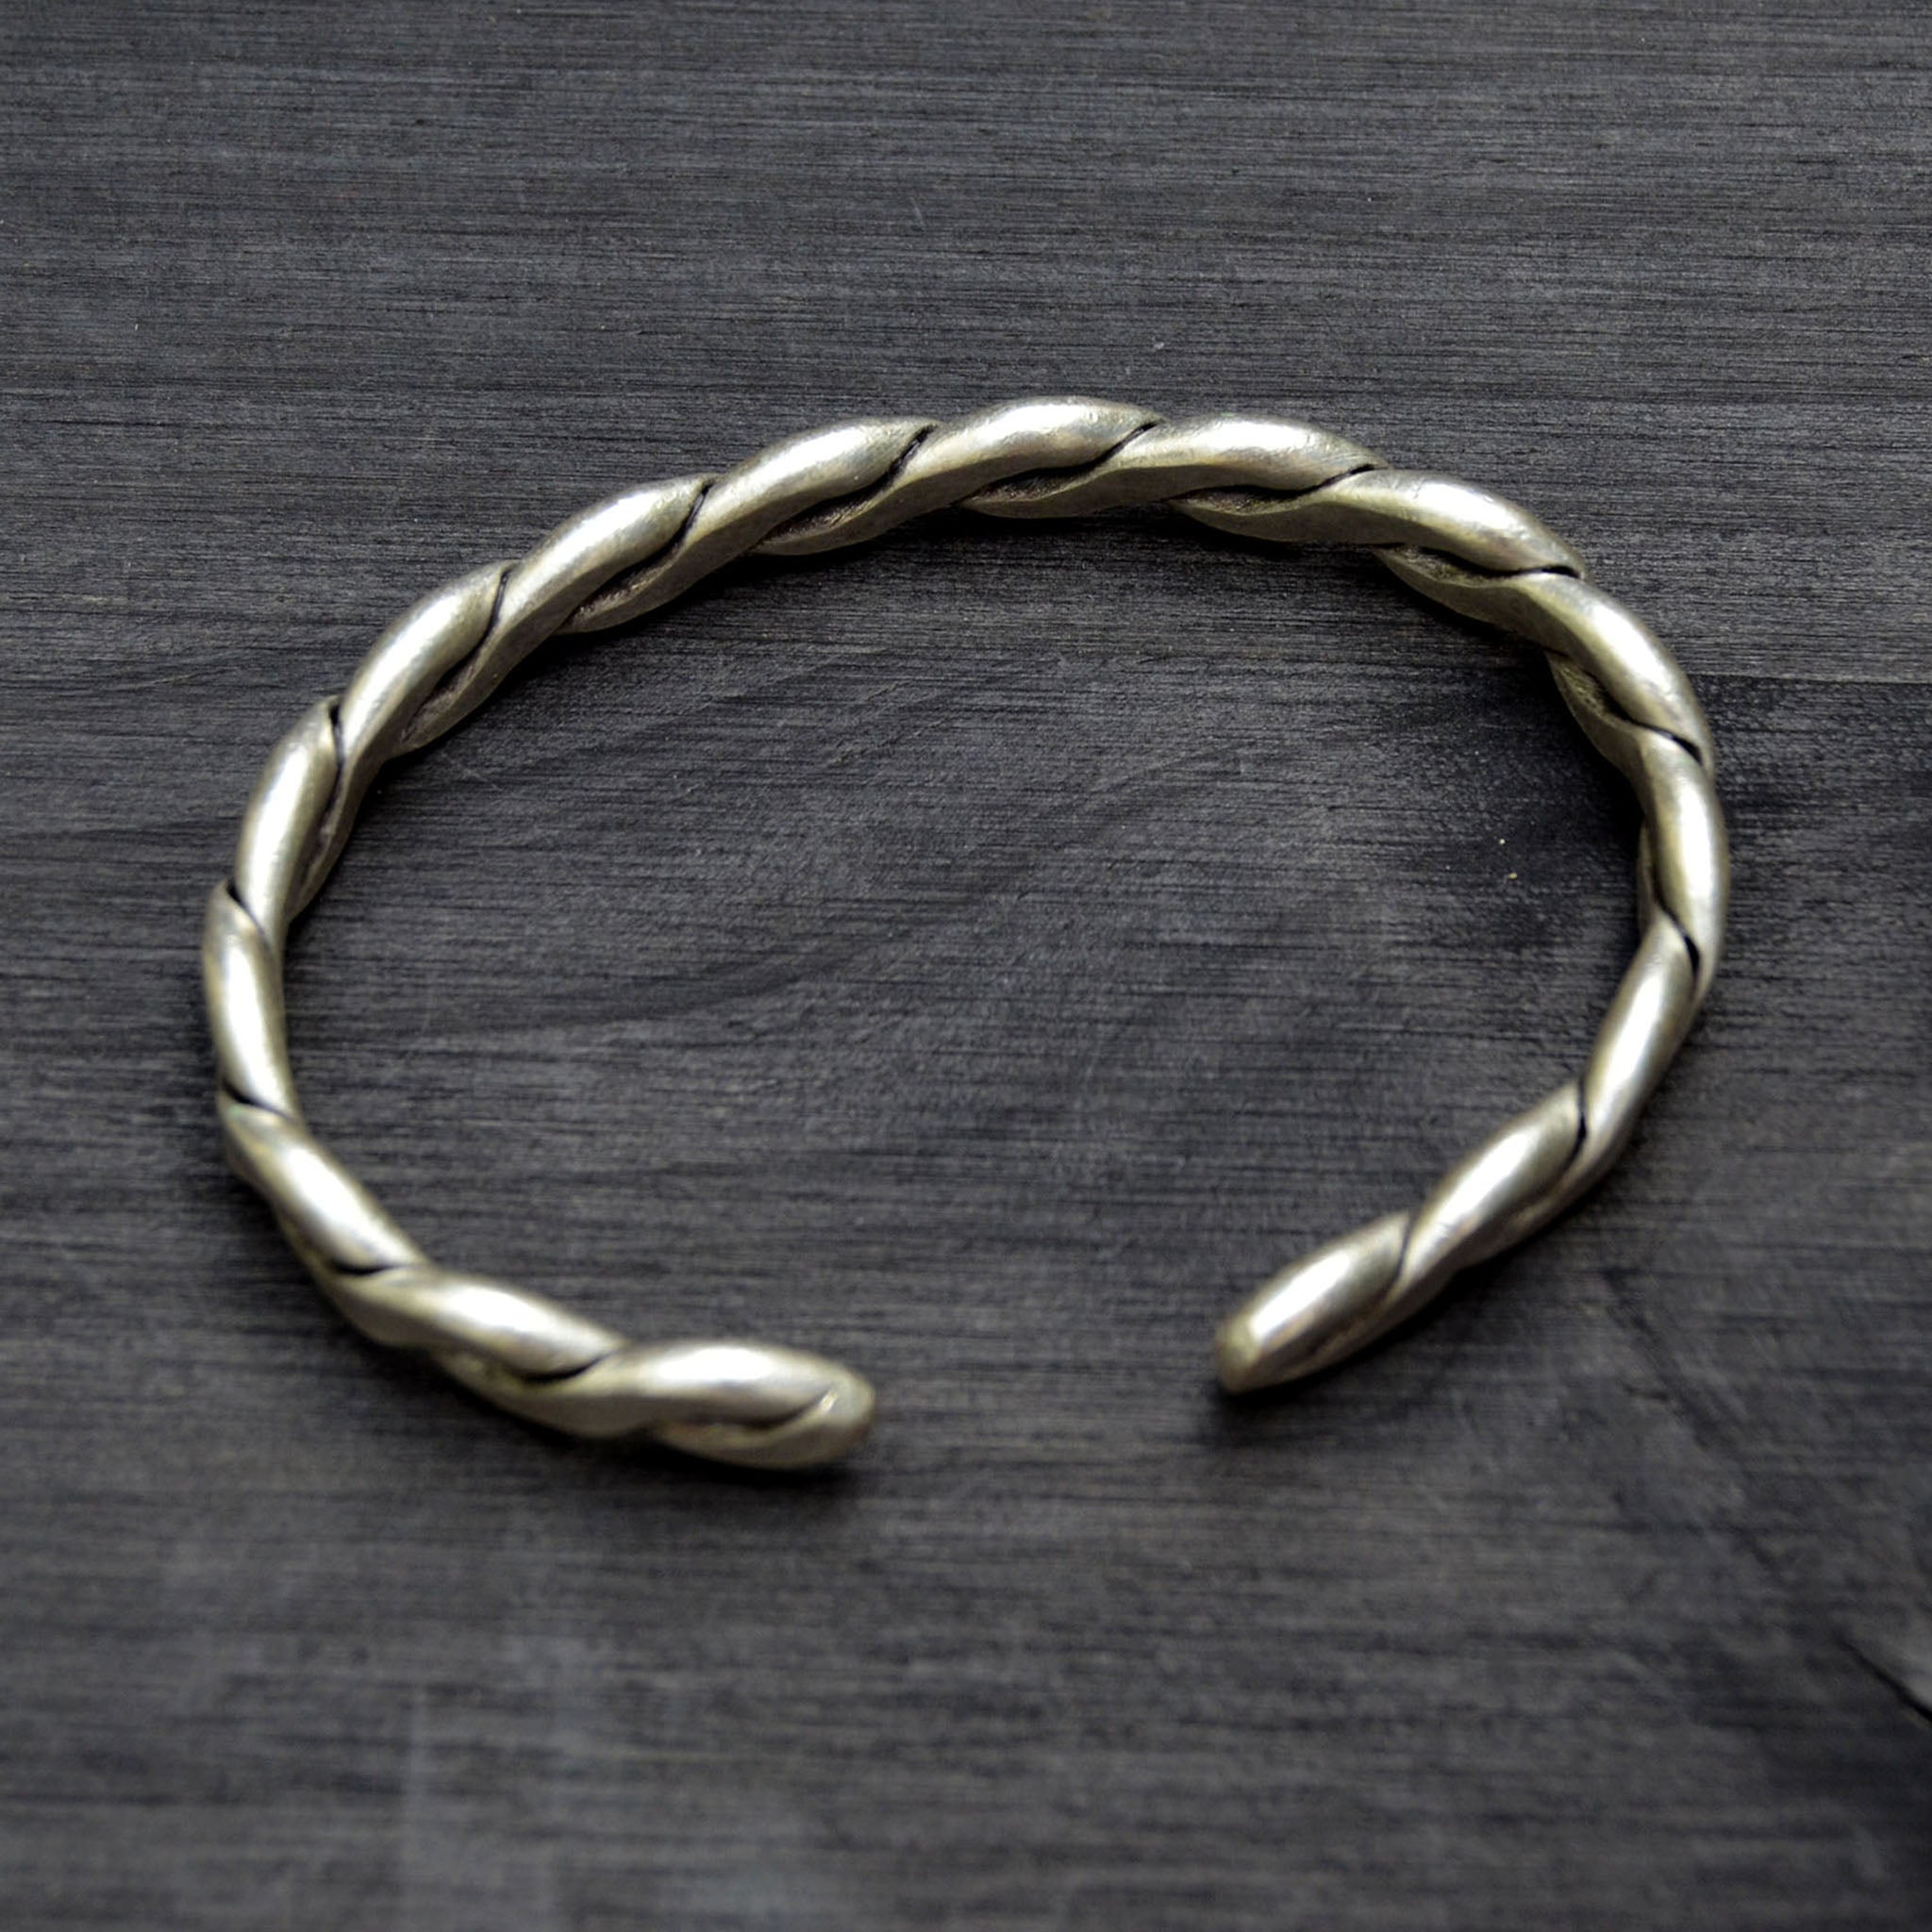 Silver plated braided bangle